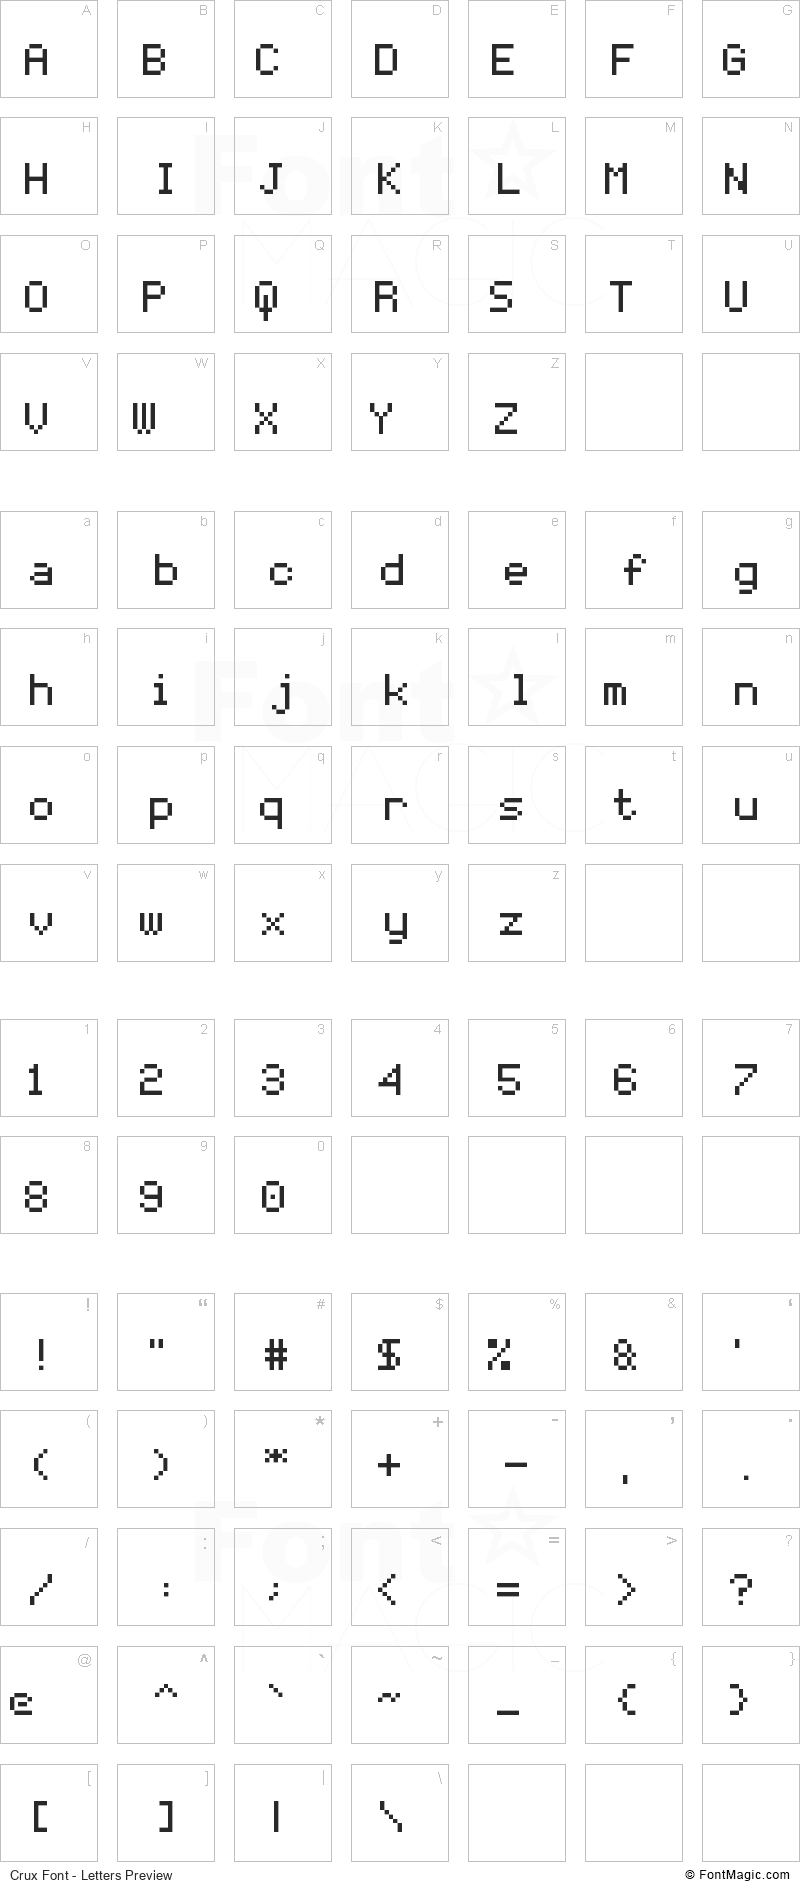 Crux Font - All Latters Preview Chart